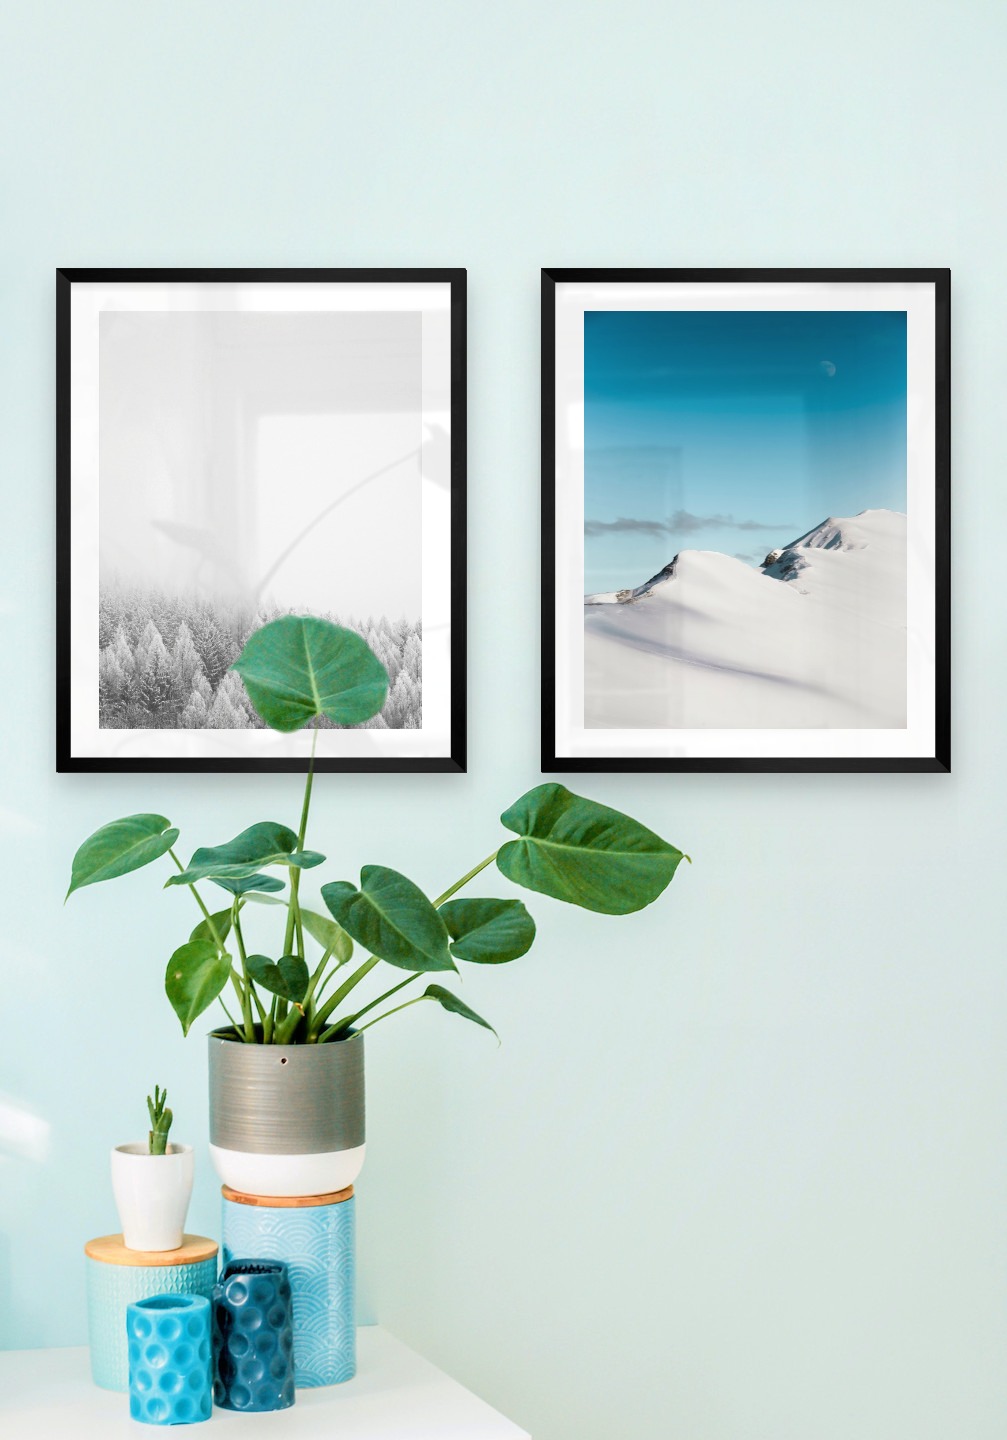 Gallery wall with picture frames in black in sizes 40x50 with prints "Wooden tops in winter" and "Snowy mountain peaks"